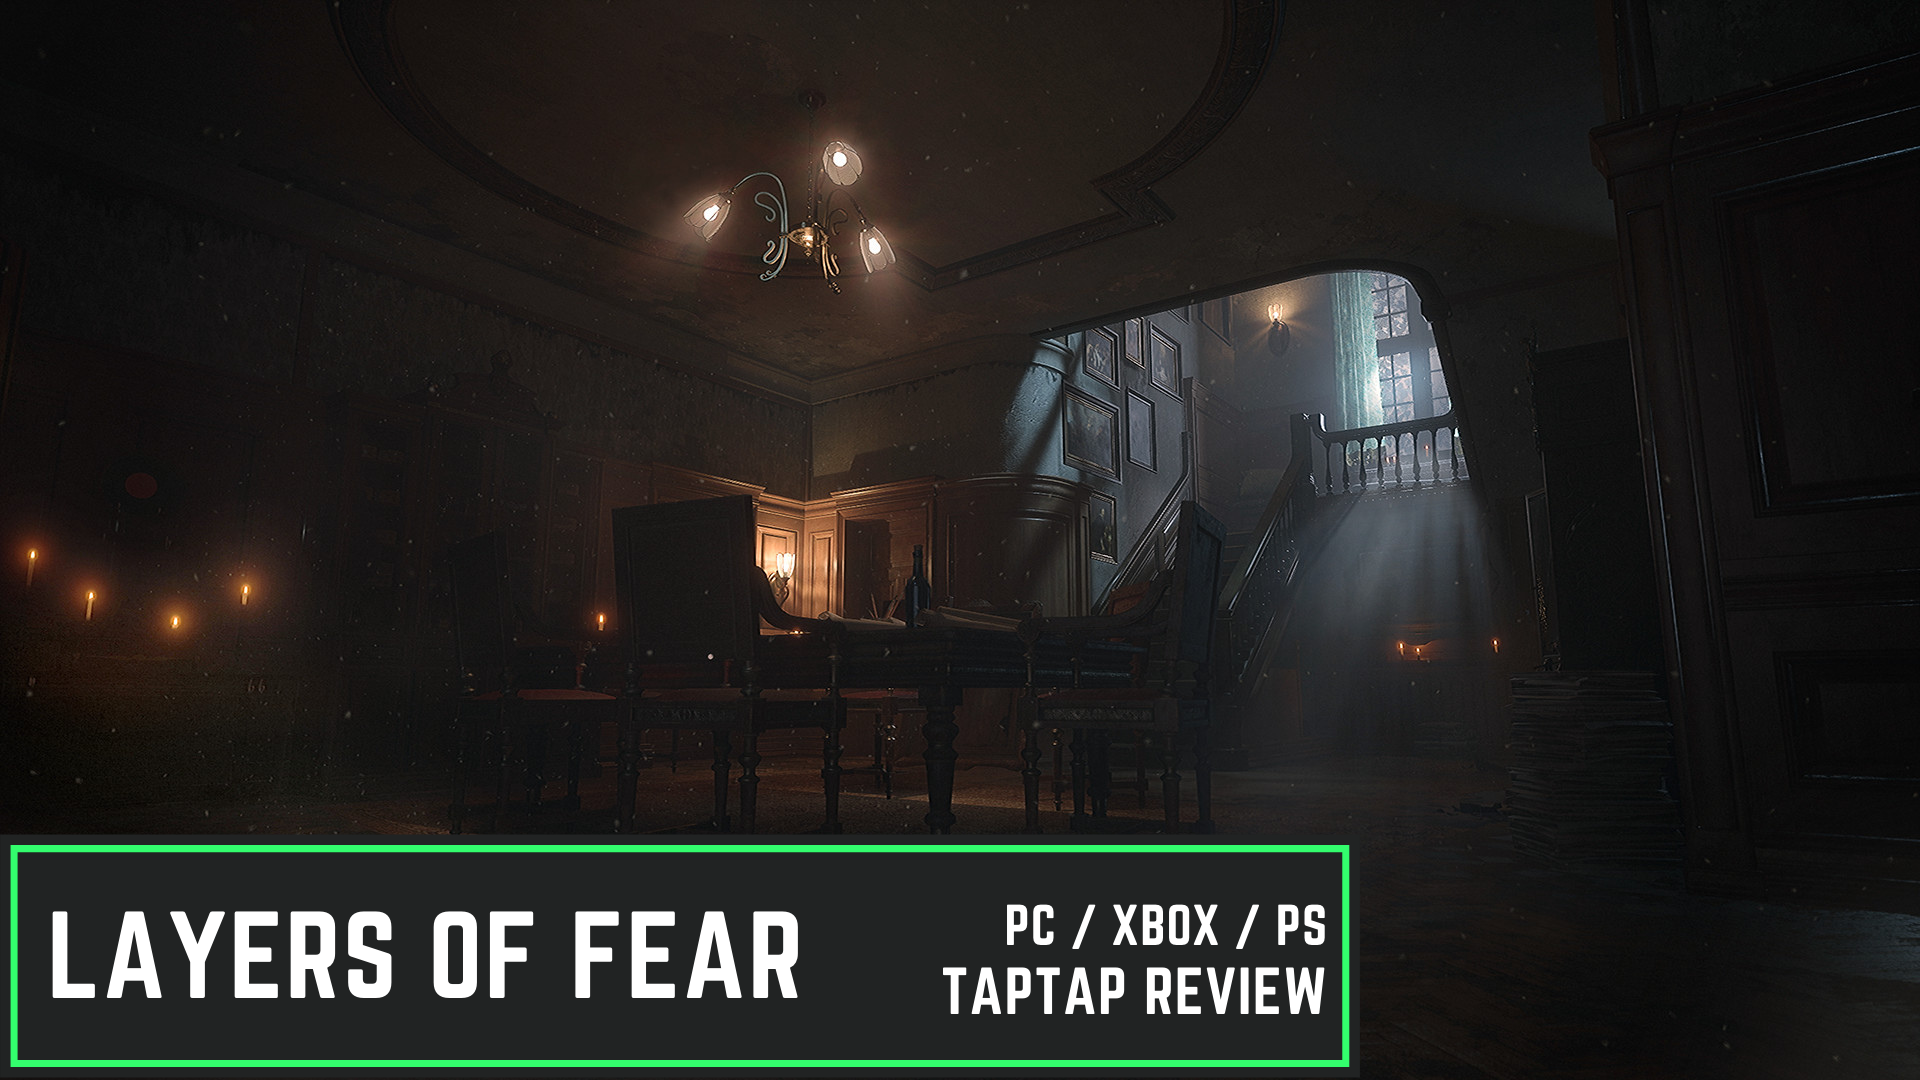 Award Winning Psychological Horror Game Layers of Fear Released for Mobile  – Available Exclusively for iOS on the App Store